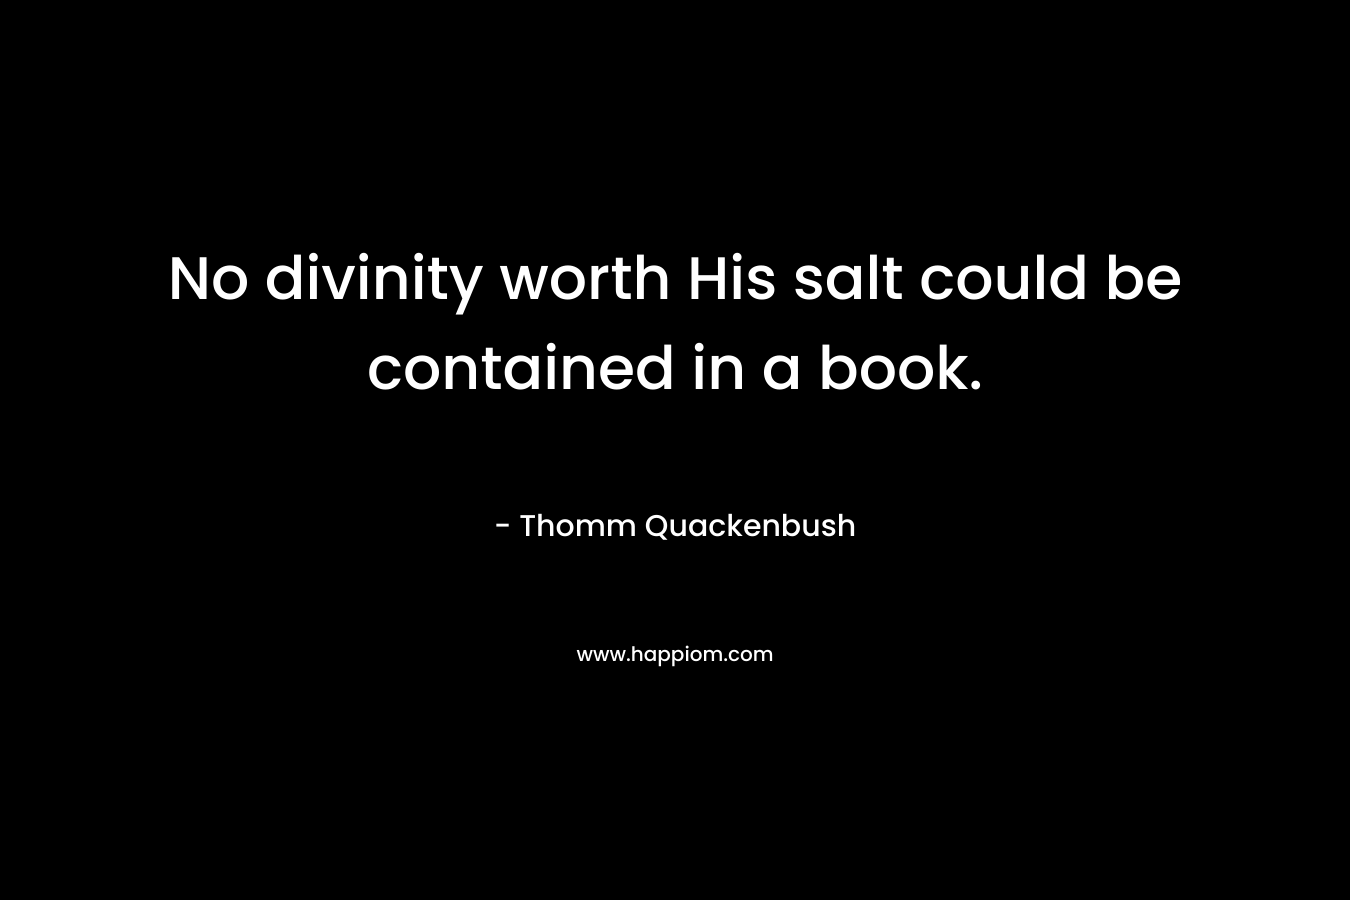 No divinity worth His salt could be contained in a book. – Thomm Quackenbush